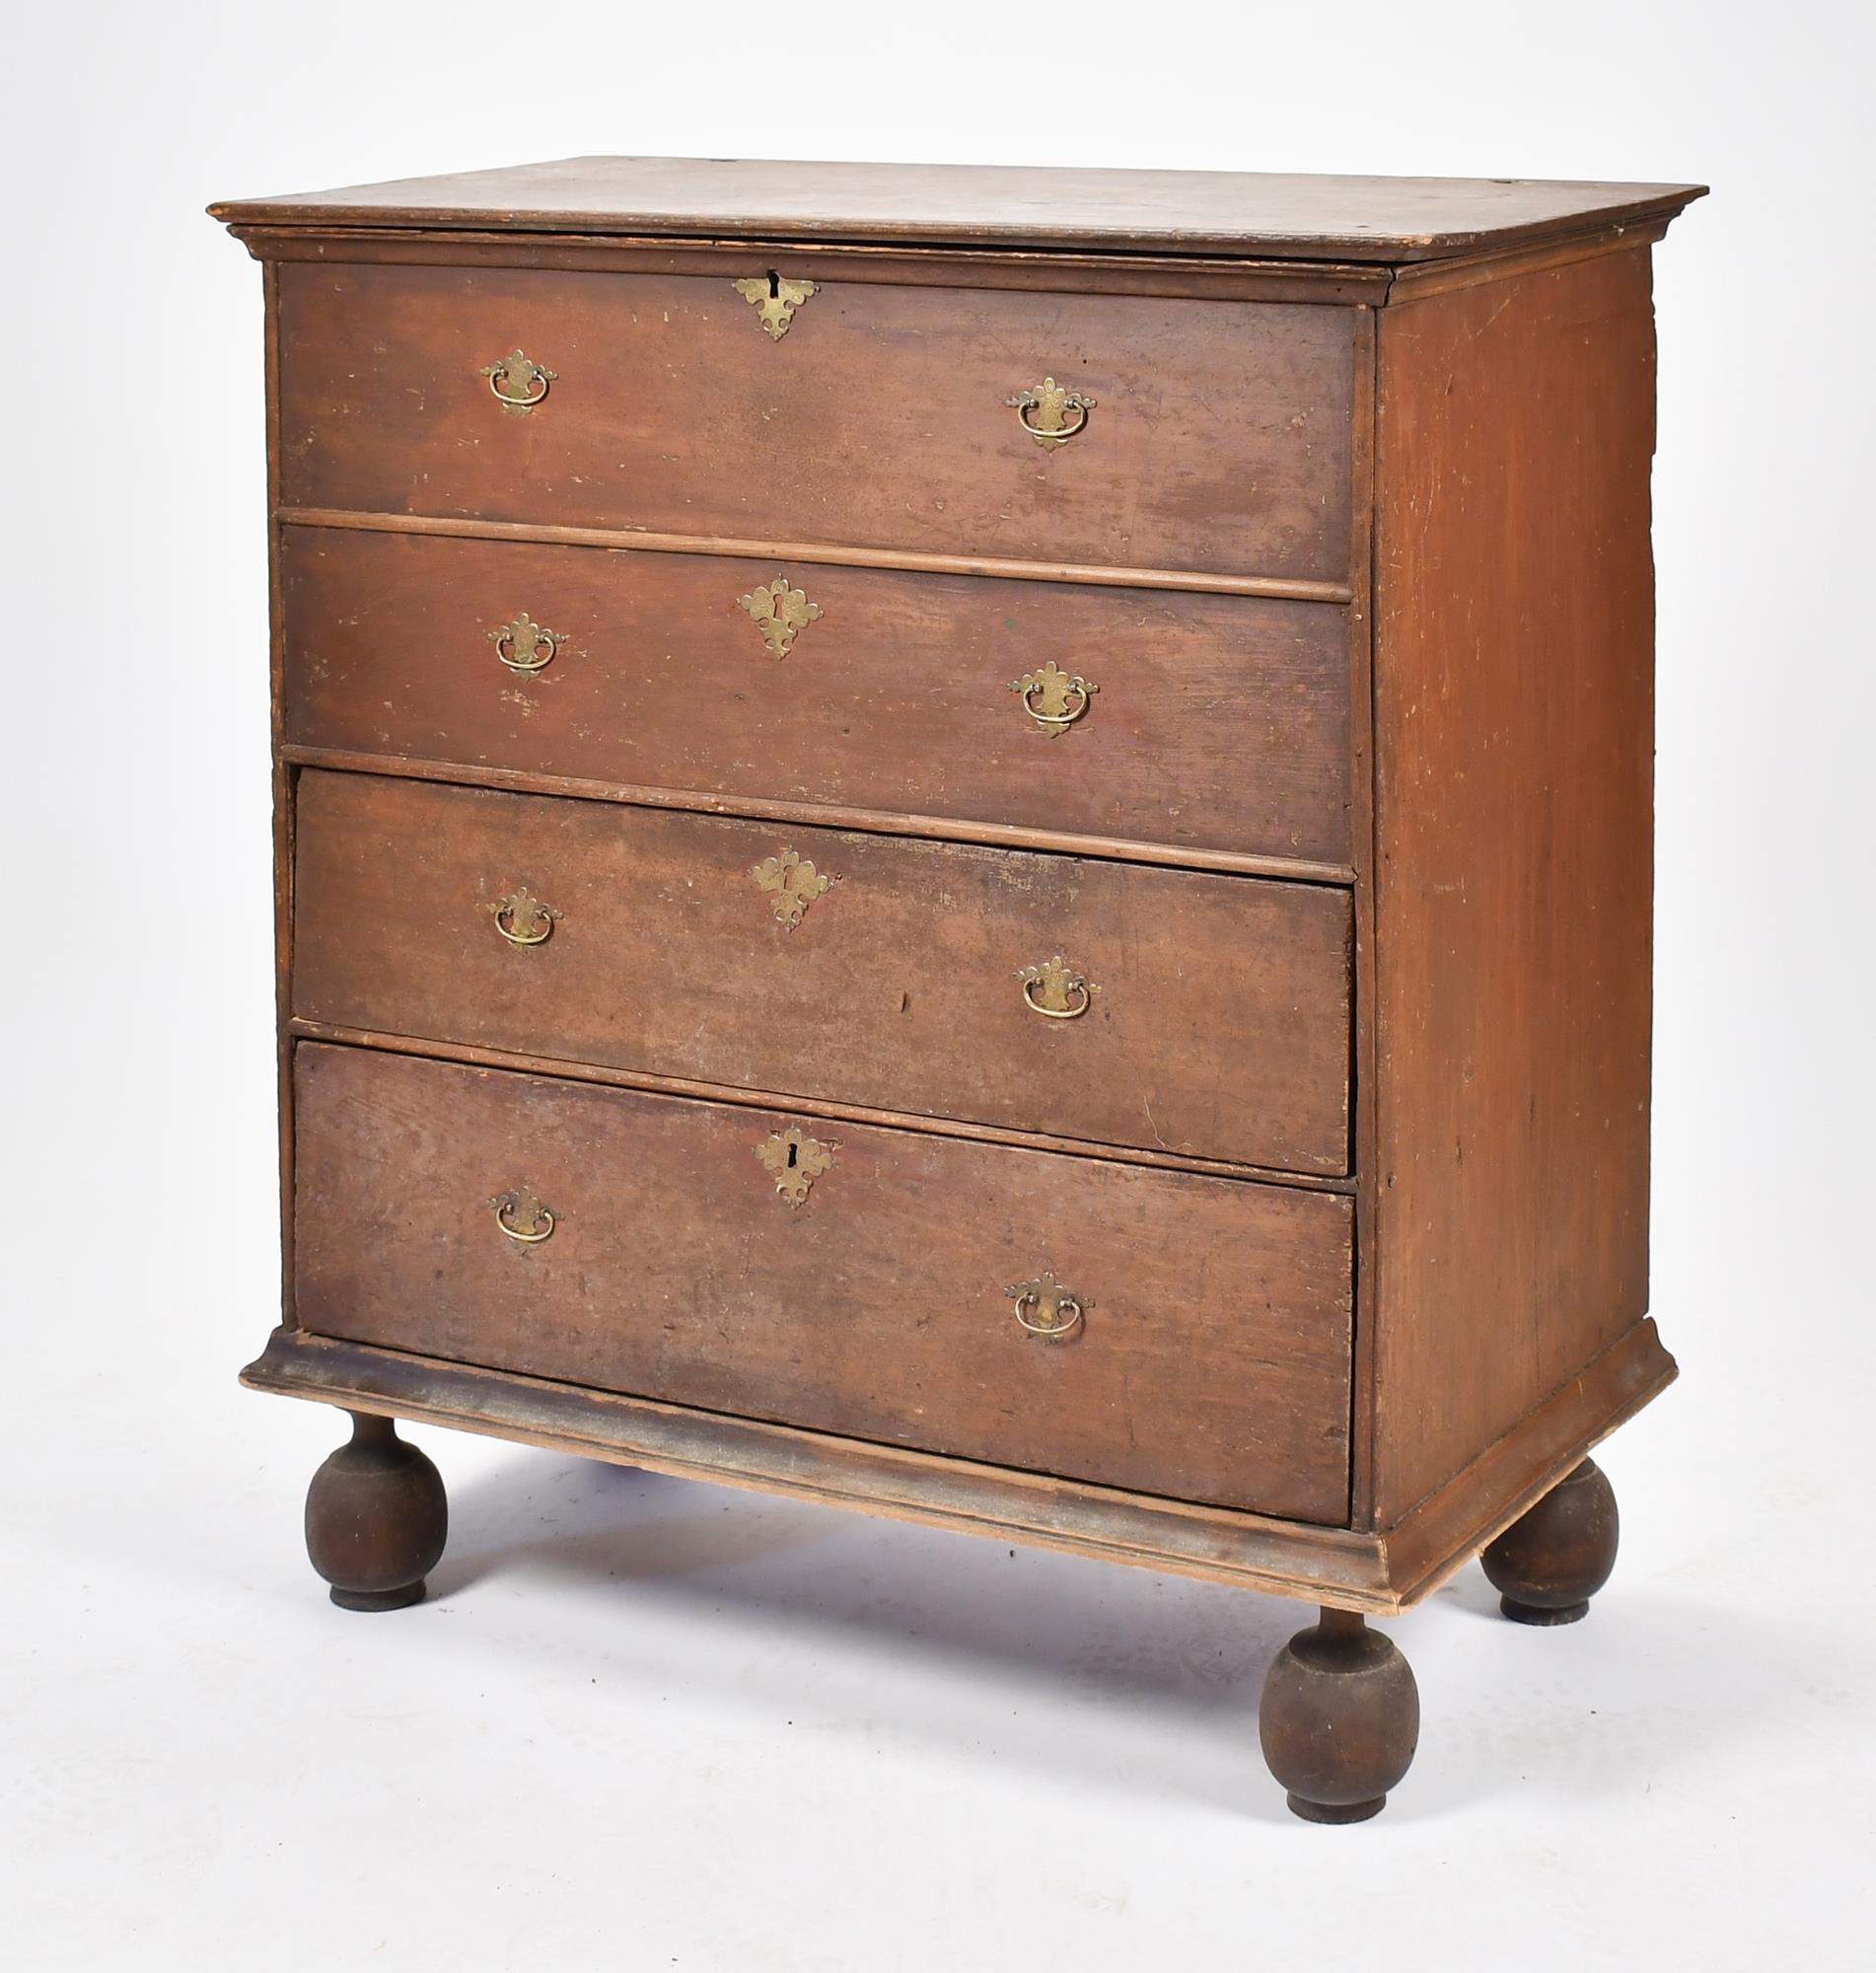 EARLY 18TH C. BALL FOOT BLANKET CHEST.